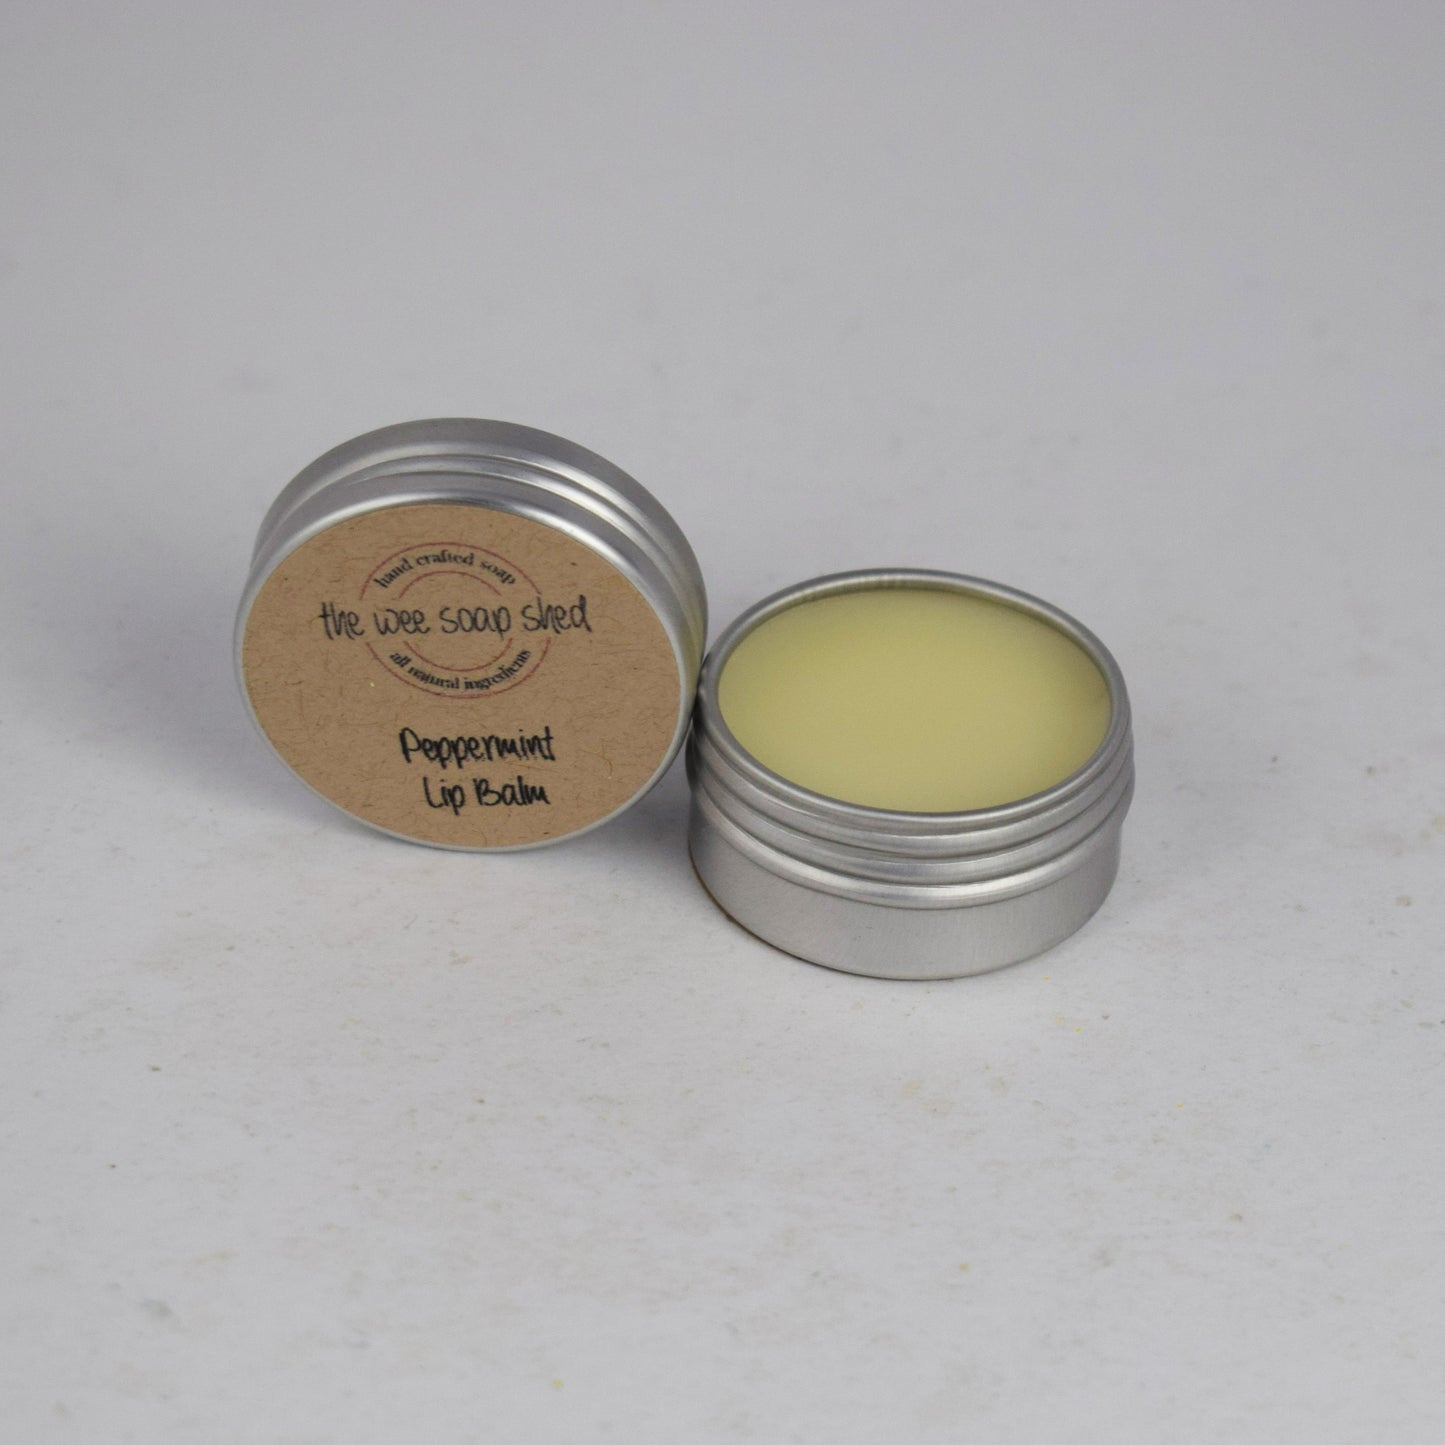 Peppermint Lip Balm with cocoa butter